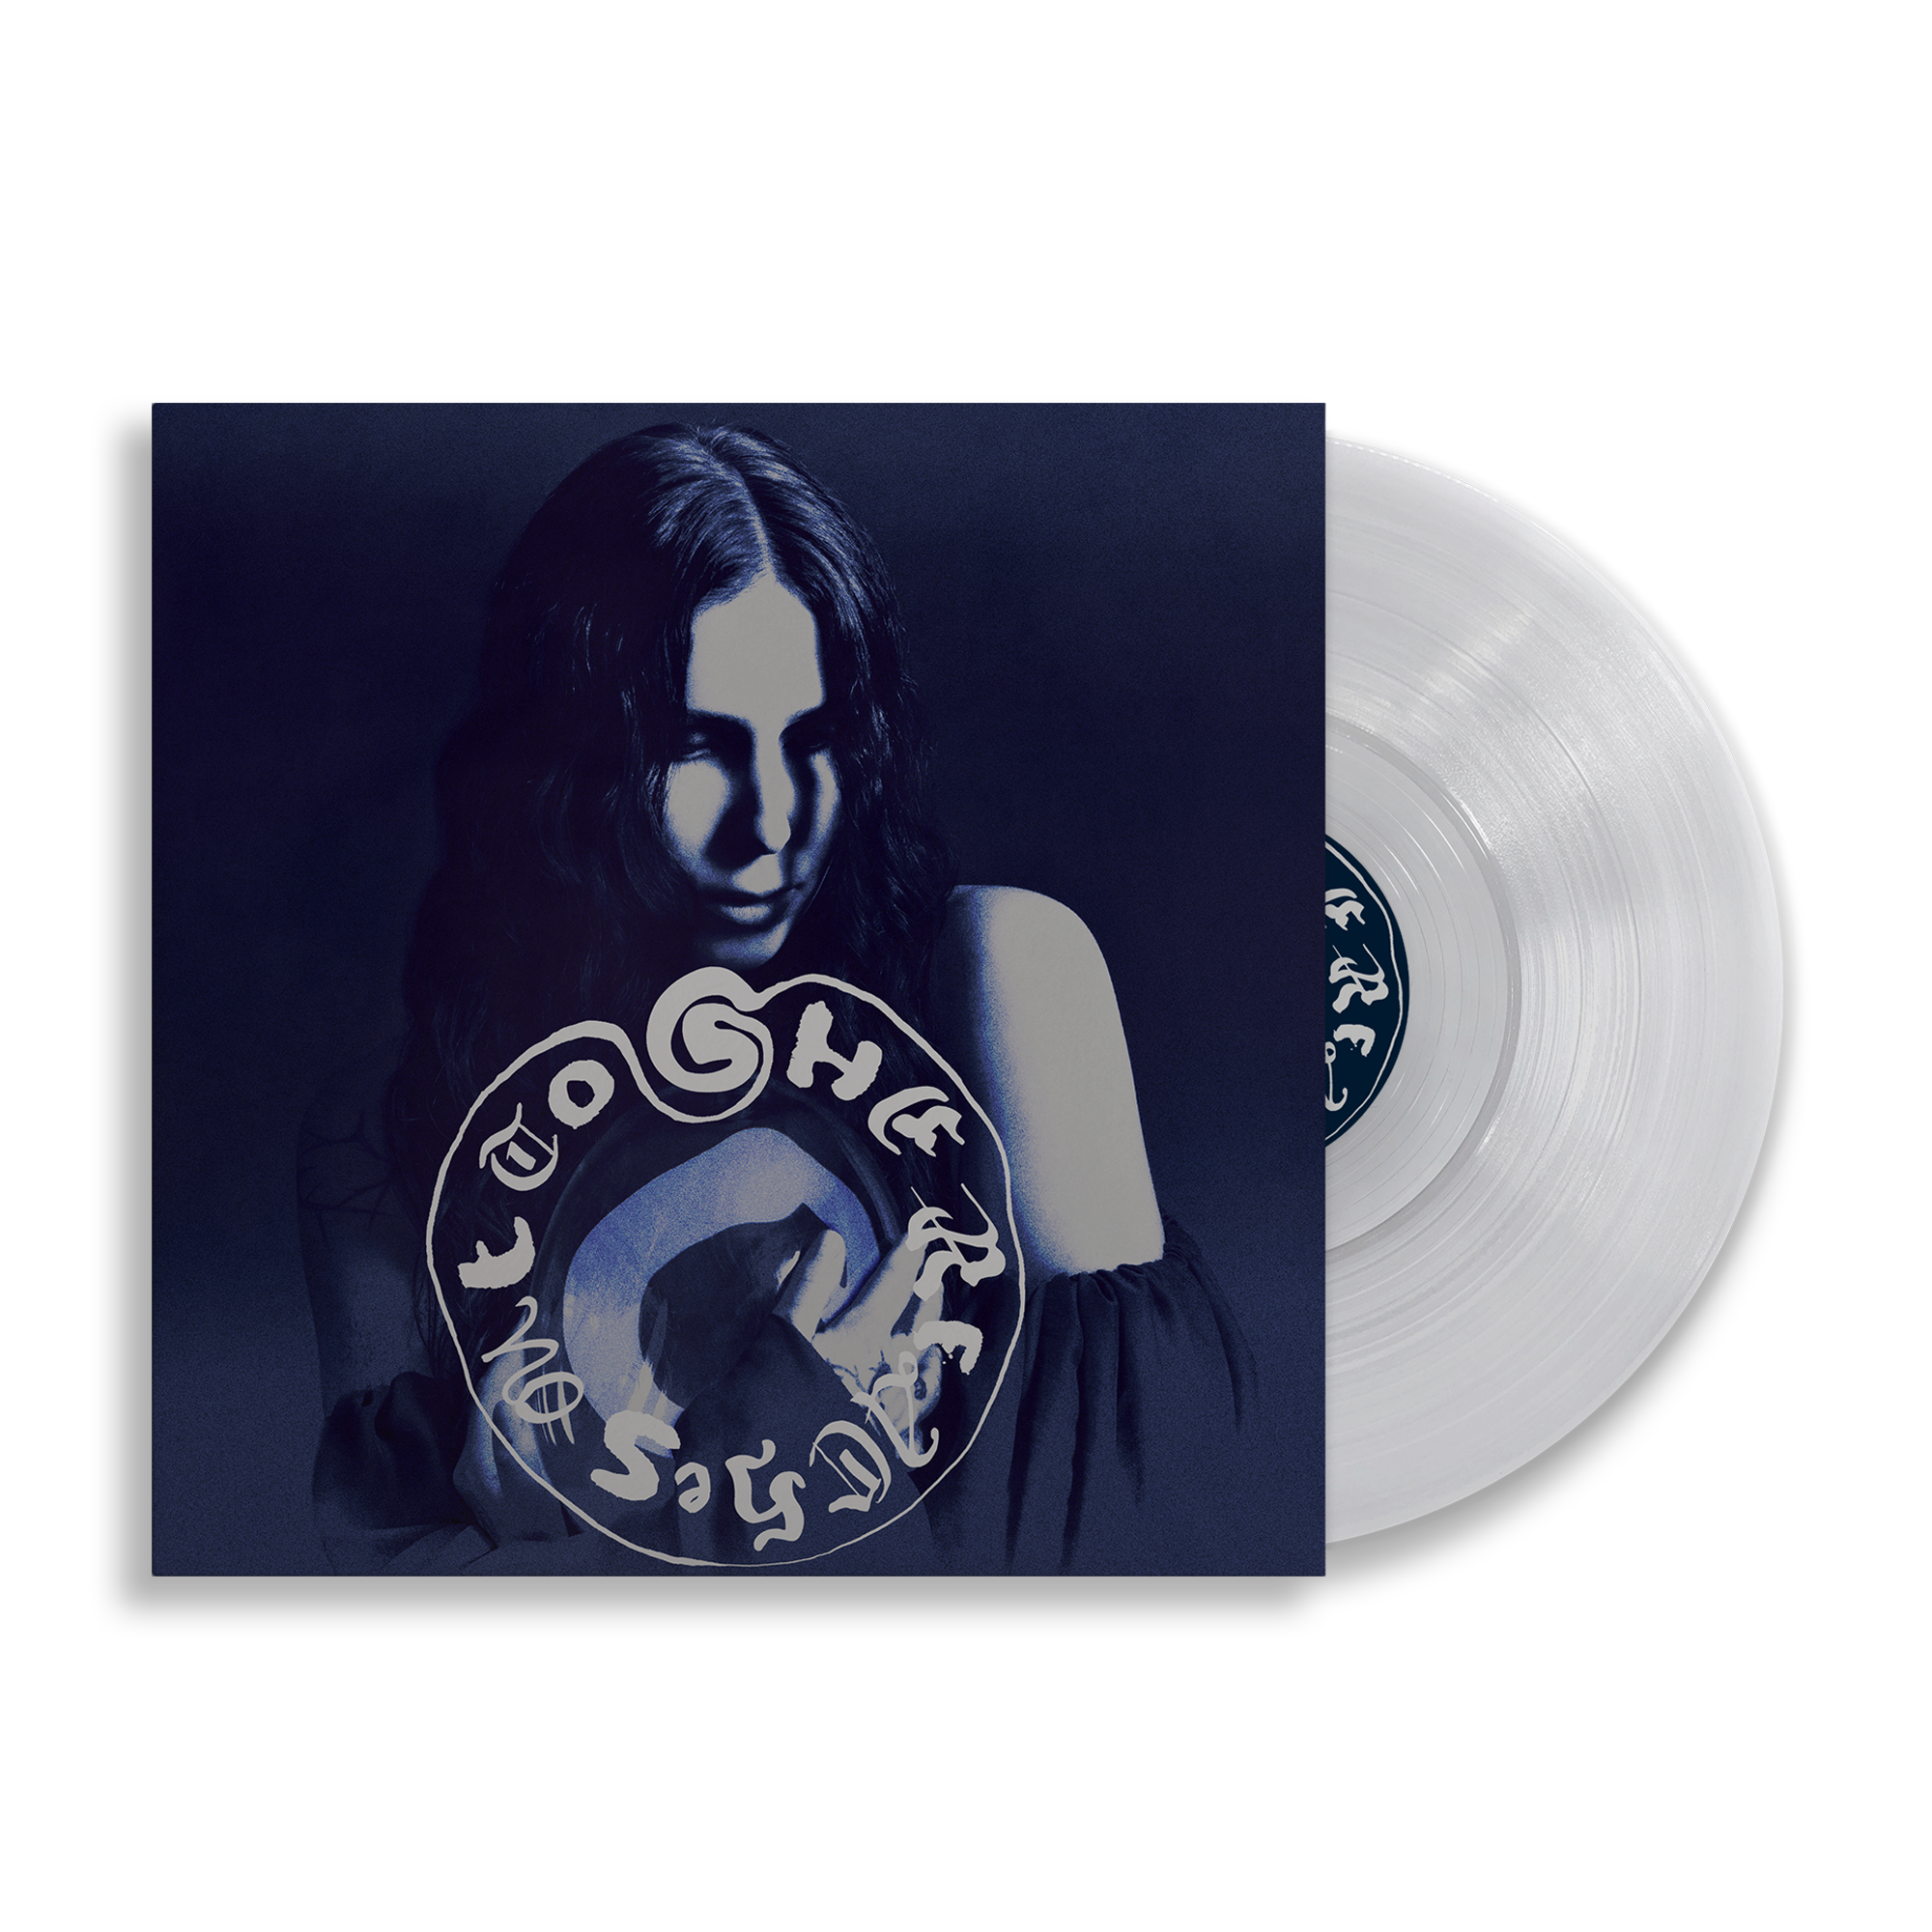 Chelsea Wolfe - She Reaches Out To She Reaches Out To She: Limited Clear Vinyl LP